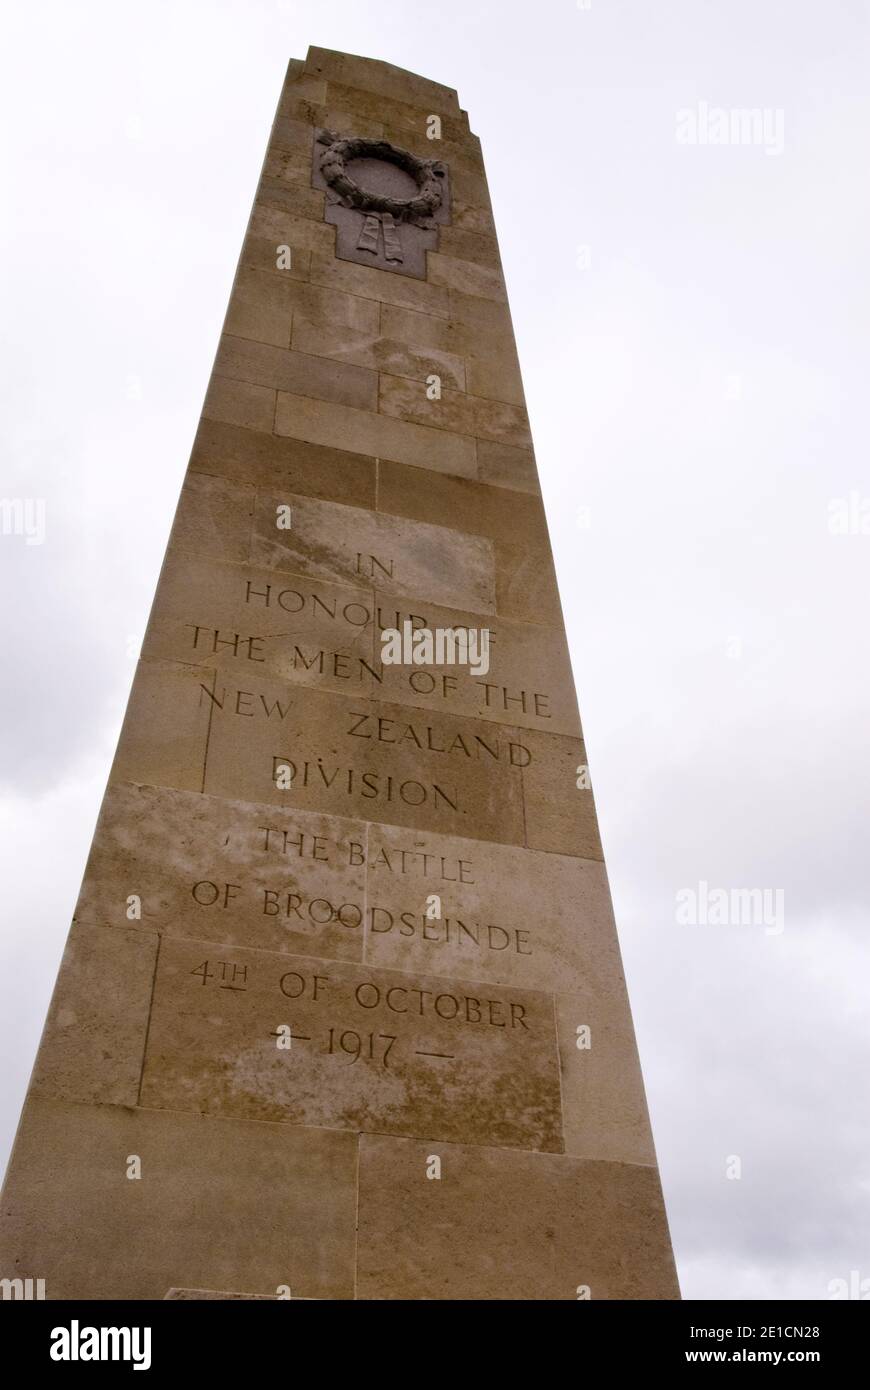 The New Zealand Division monument at Zonnebeke, near Ypres, dedicated to the New Zealand Division that fought in the Battle of Broodseinde, 1917. Stock Photo